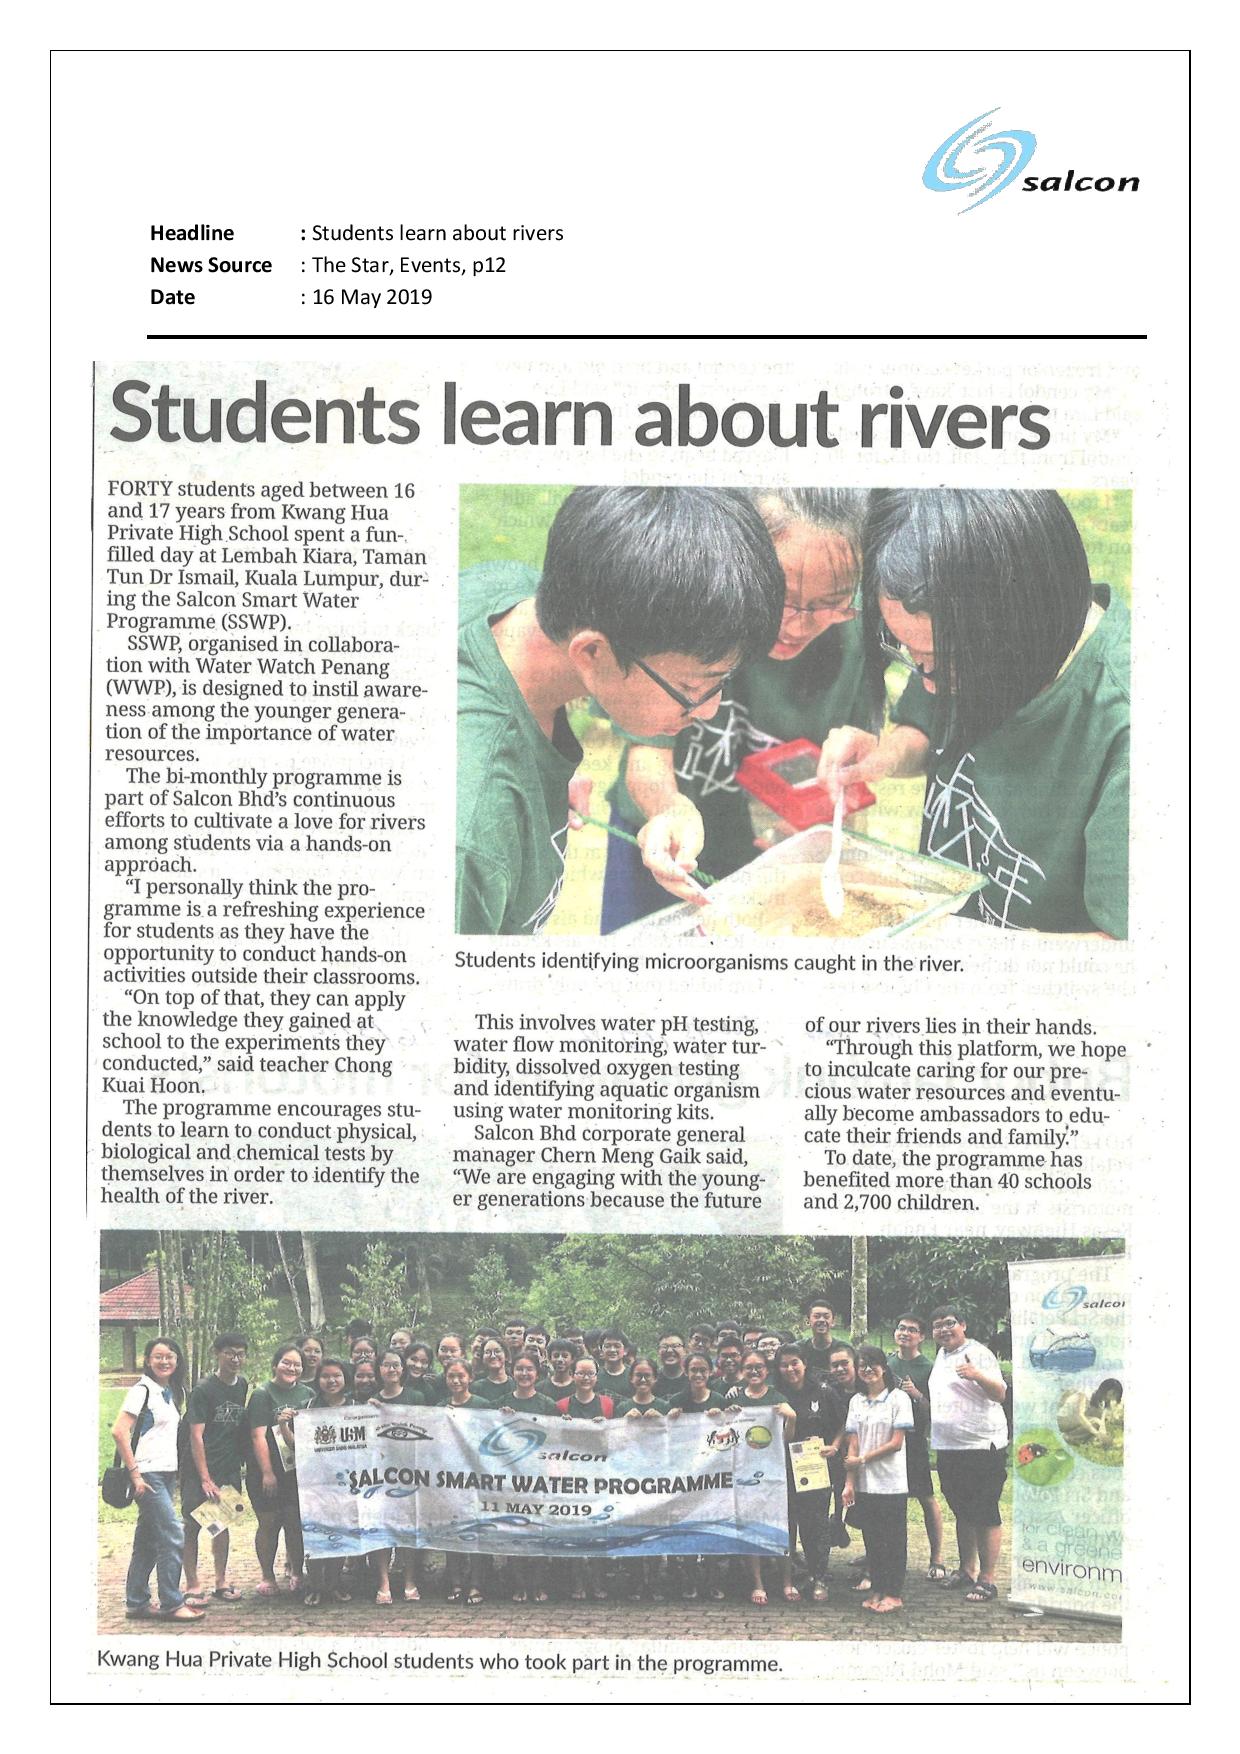 Students learn about rivers